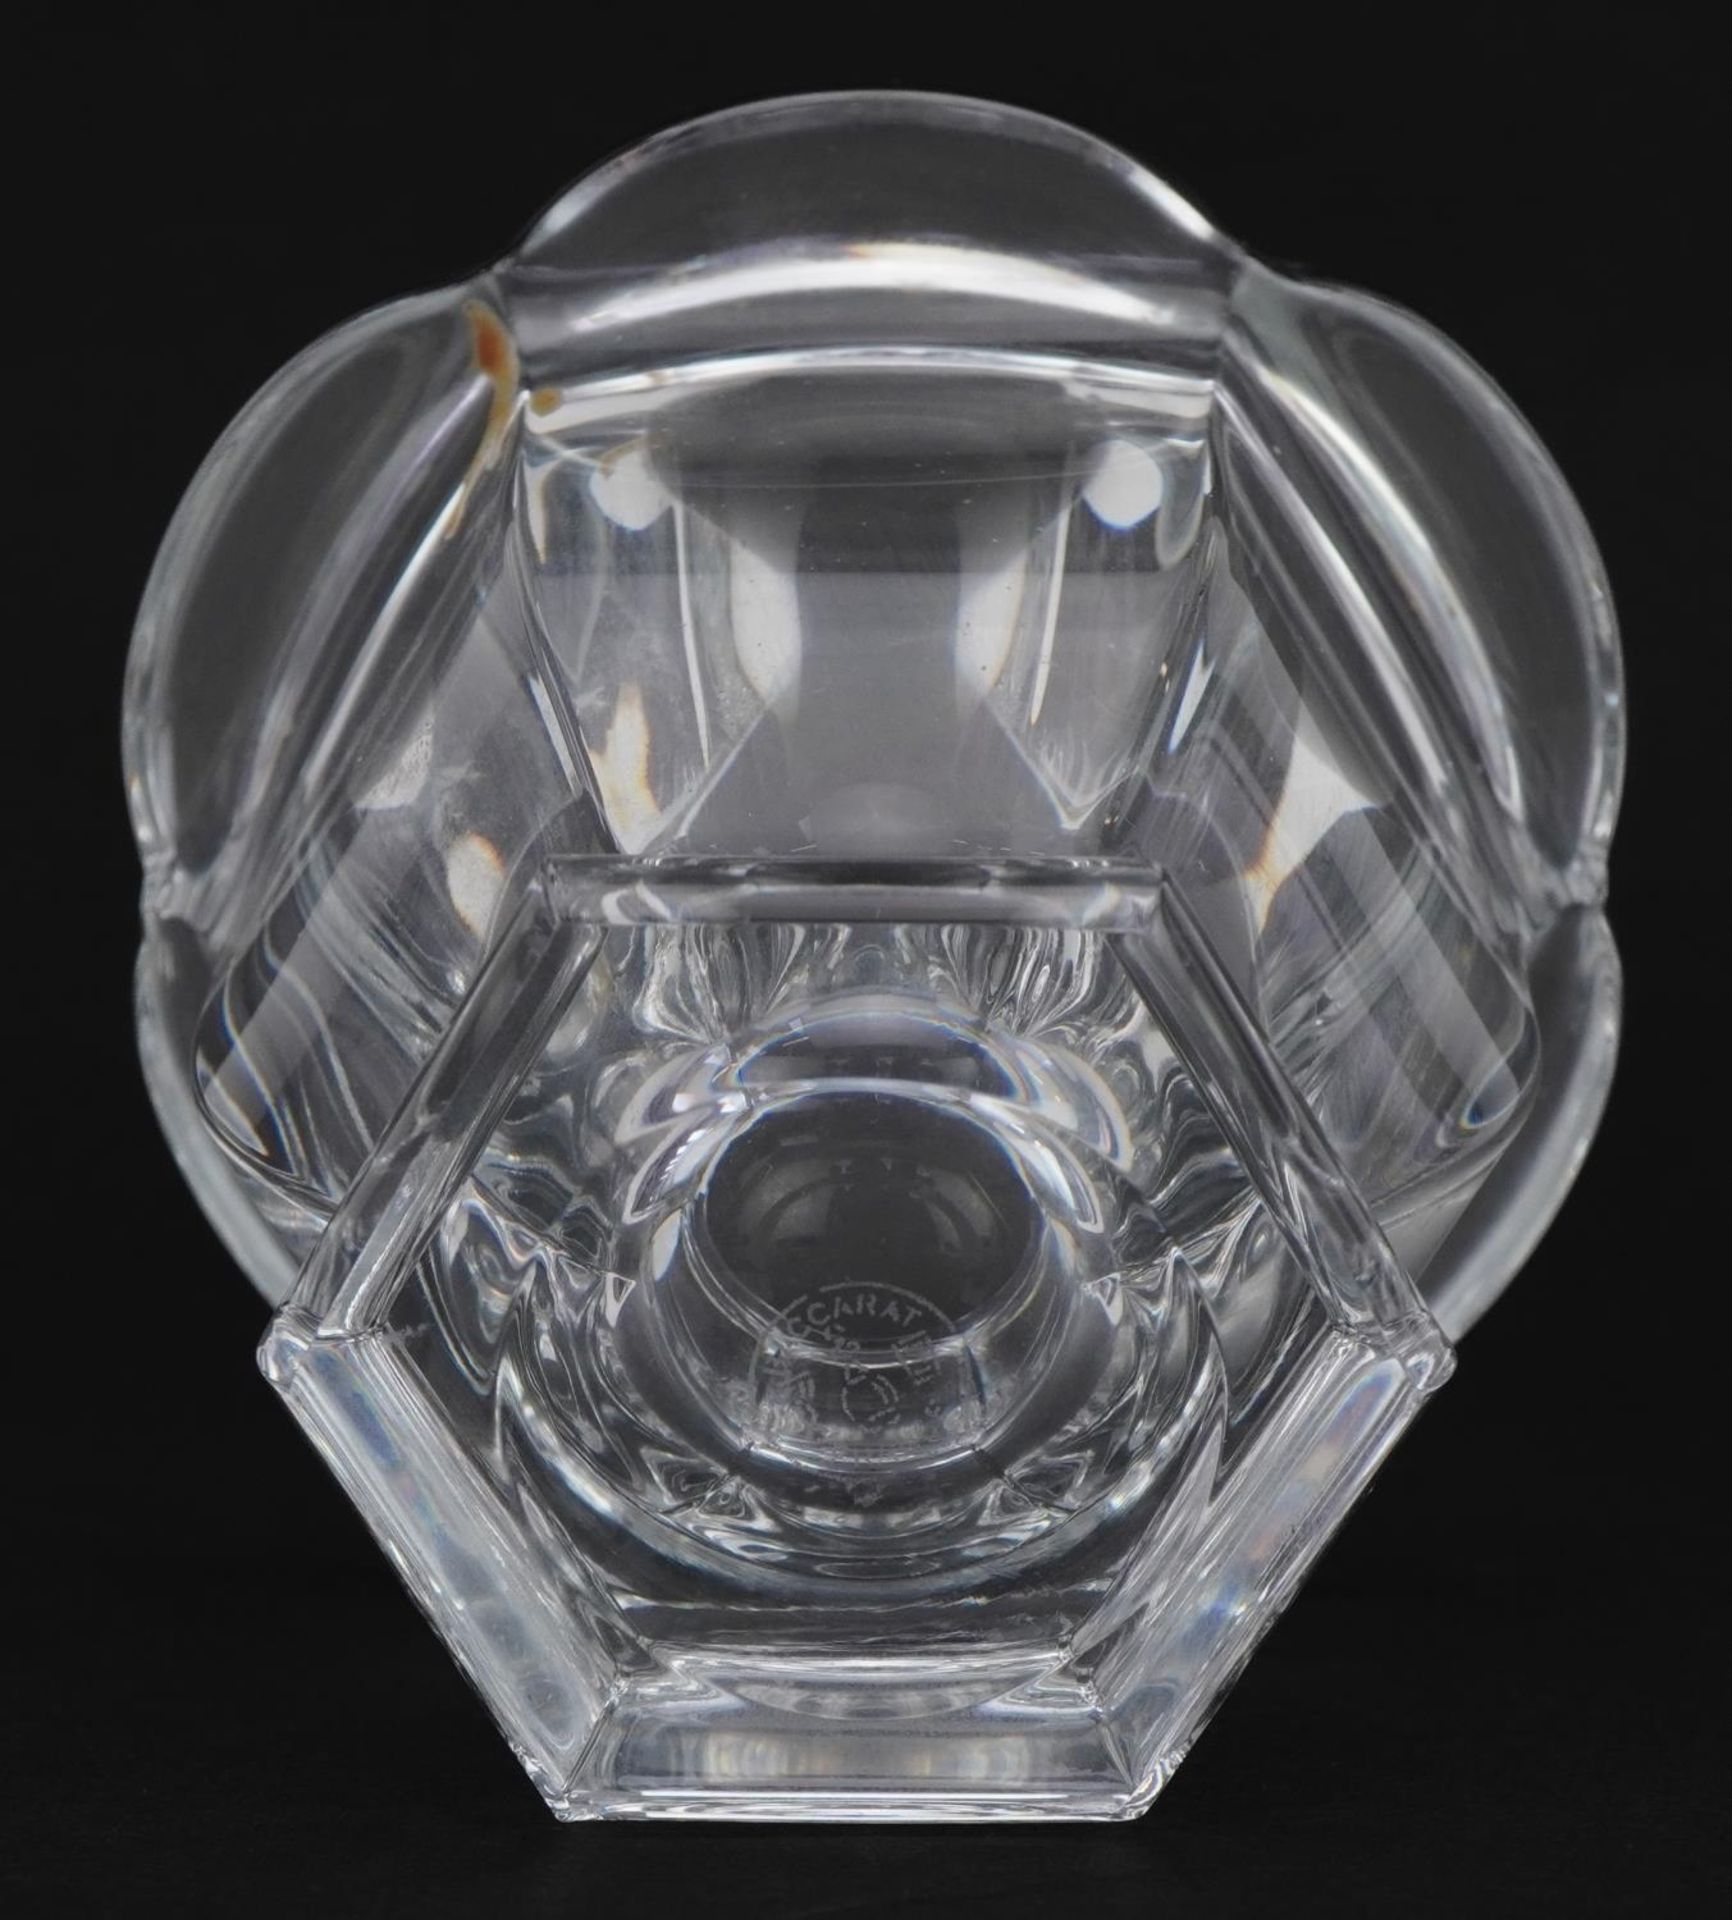 Baccarat, French crystal sauce lidded preserve pot with spoon, 11.5cm high - Image 5 of 8